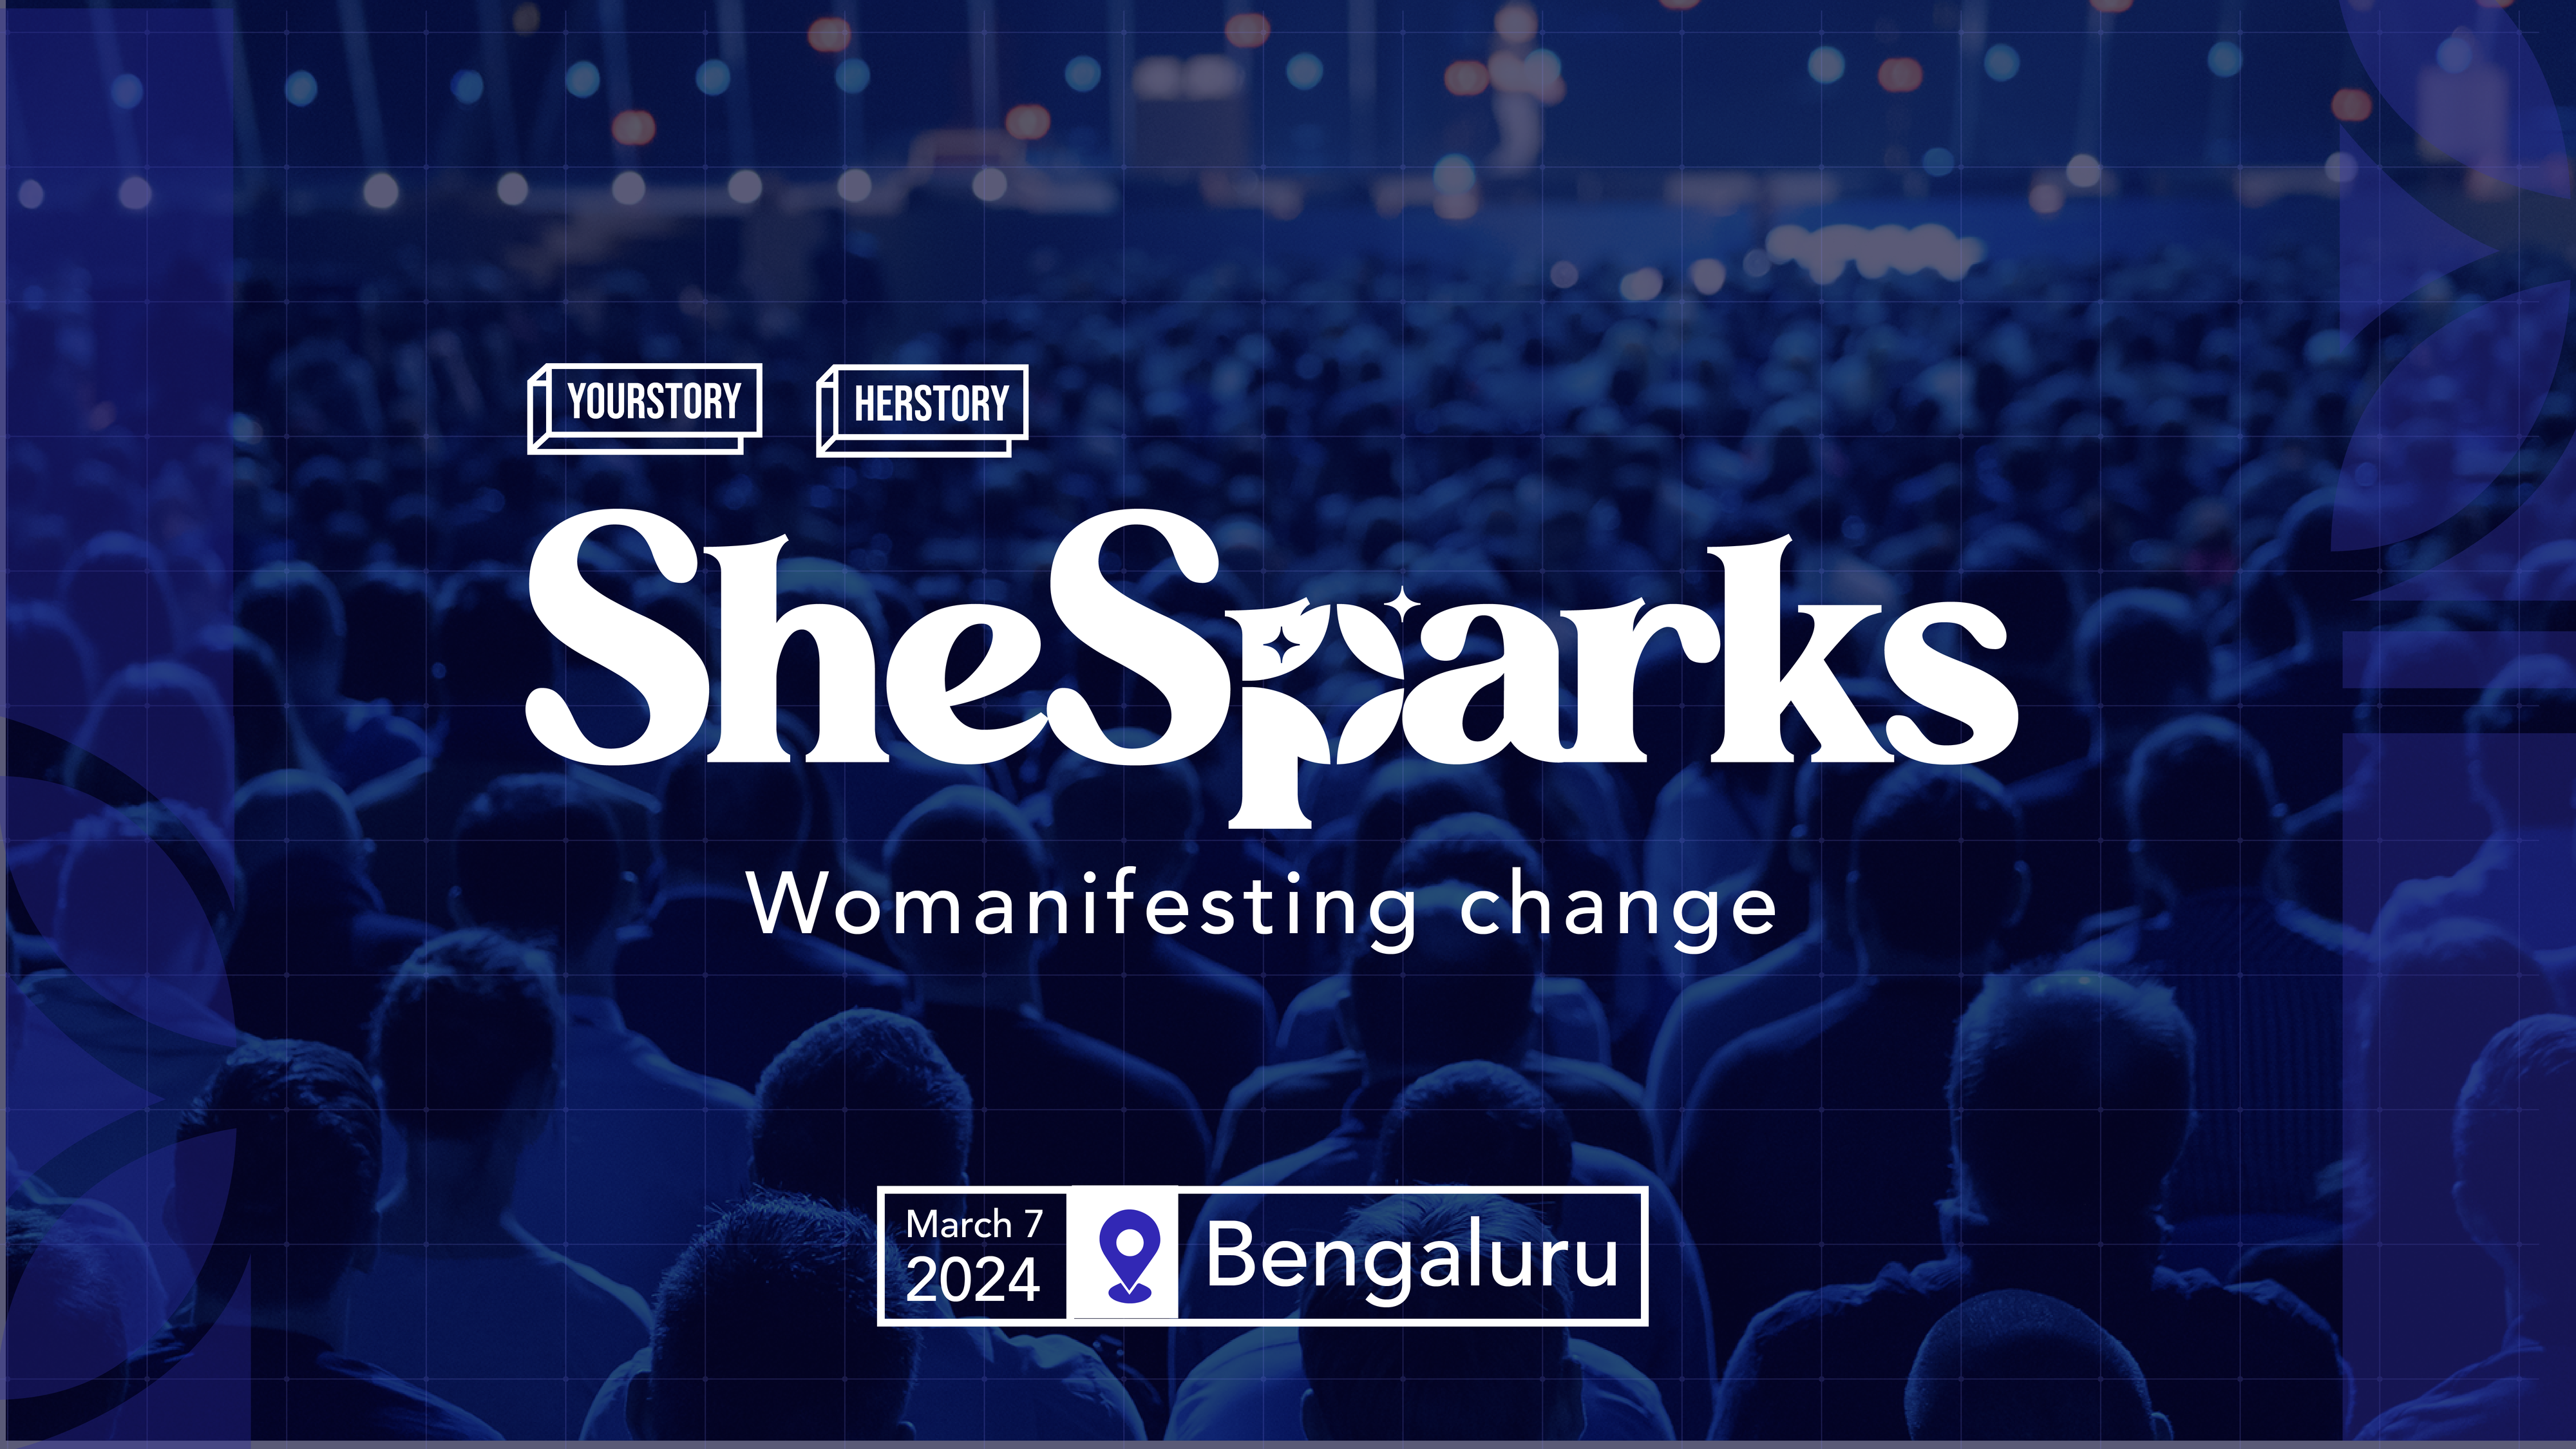 Meet India’s most inspiring changemakers and leaders at SheSparks 2024